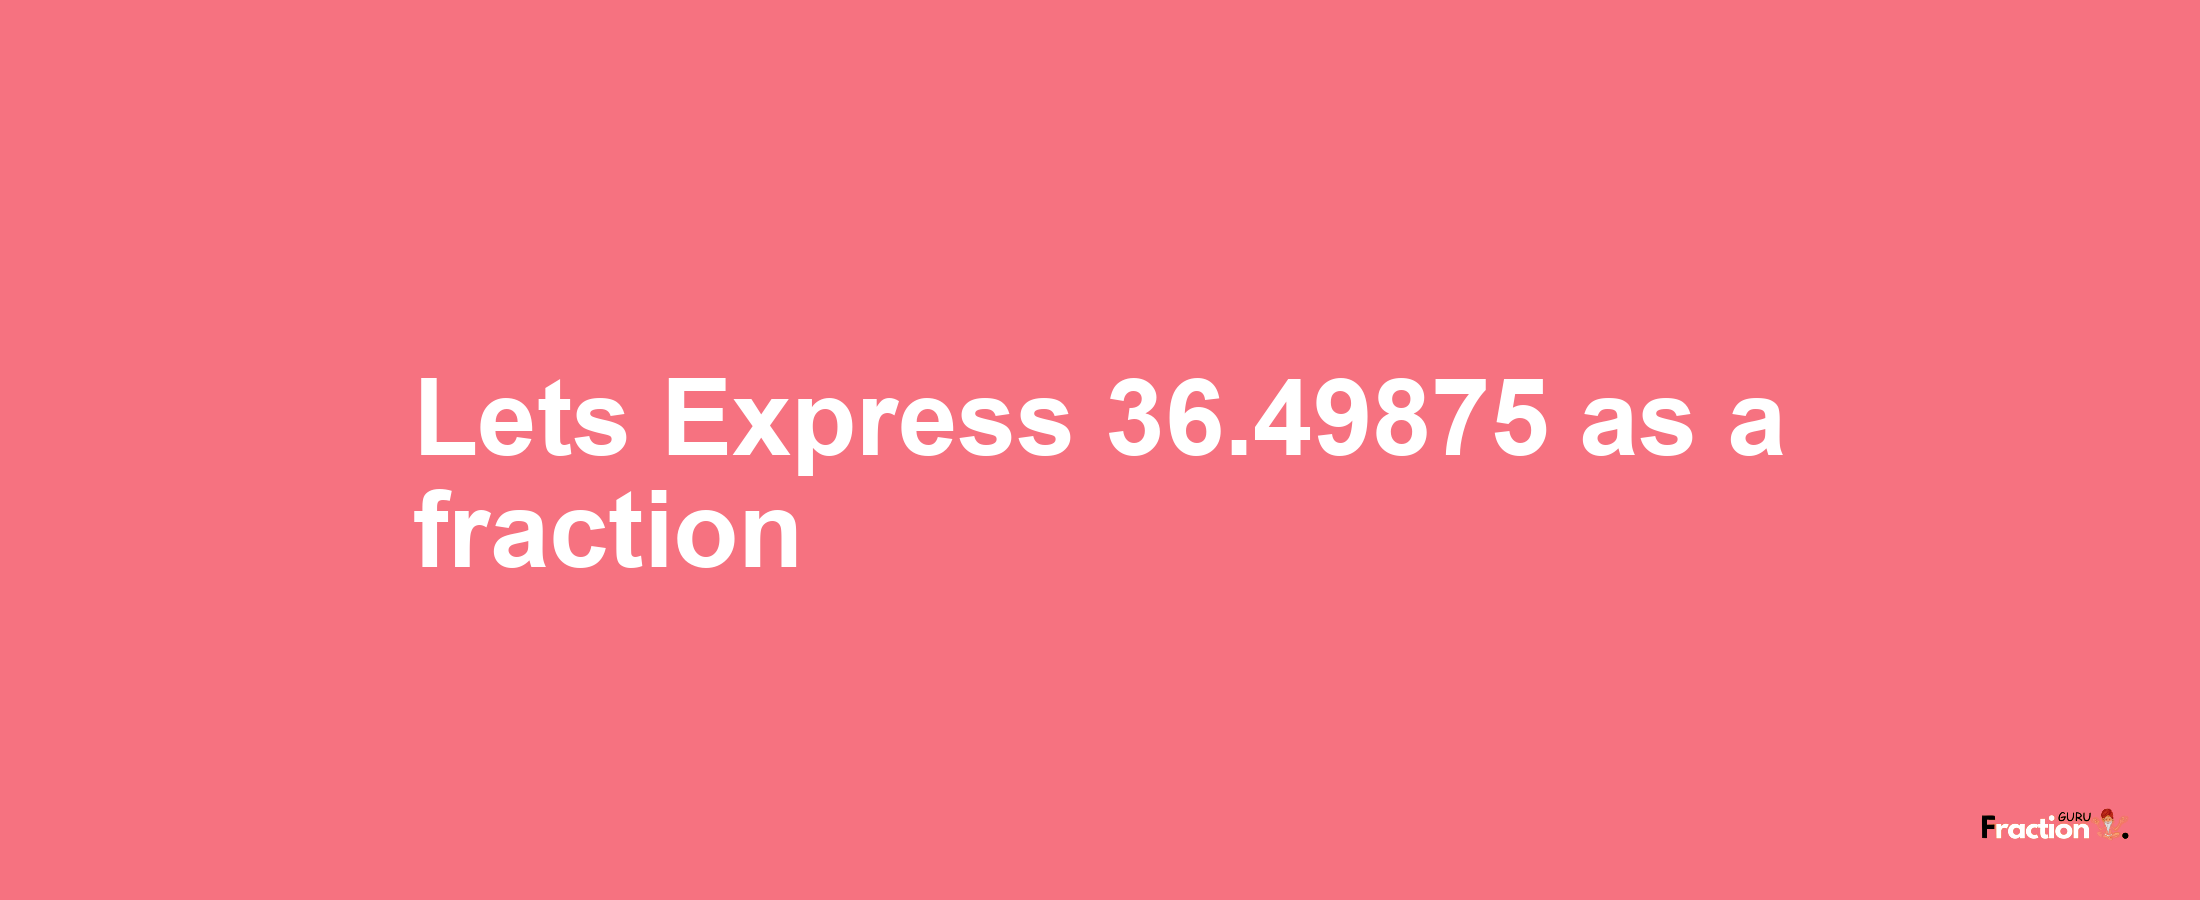 Lets Express 36.49875 as afraction